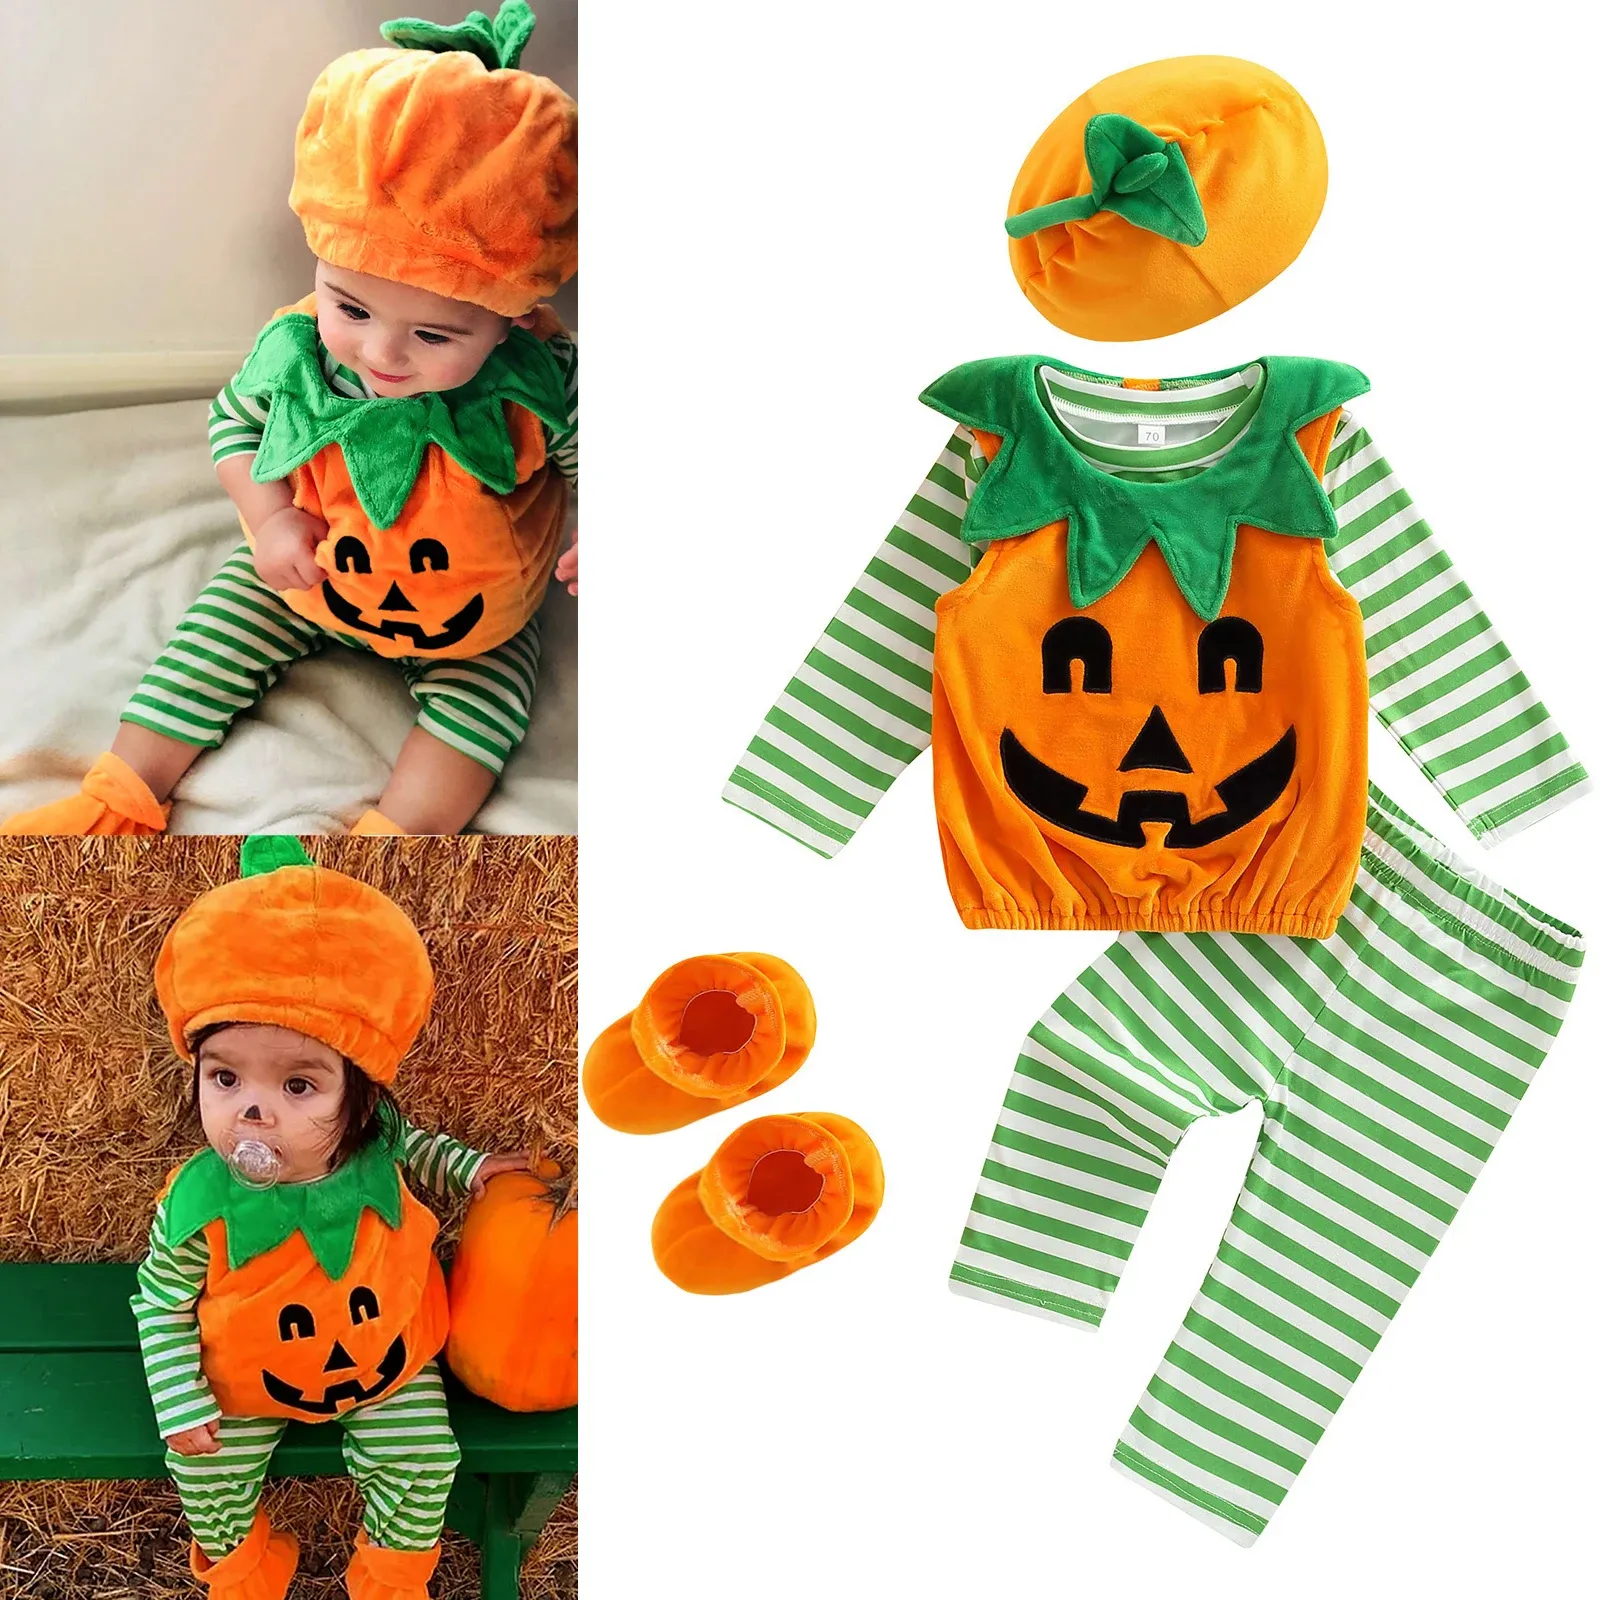 Sets Toddler Outfit Suit Baby Girl Boy Long Sleeve Halloween Pumpkin Print Loose Tops + Fall Casual Pants + Hat + Shoes